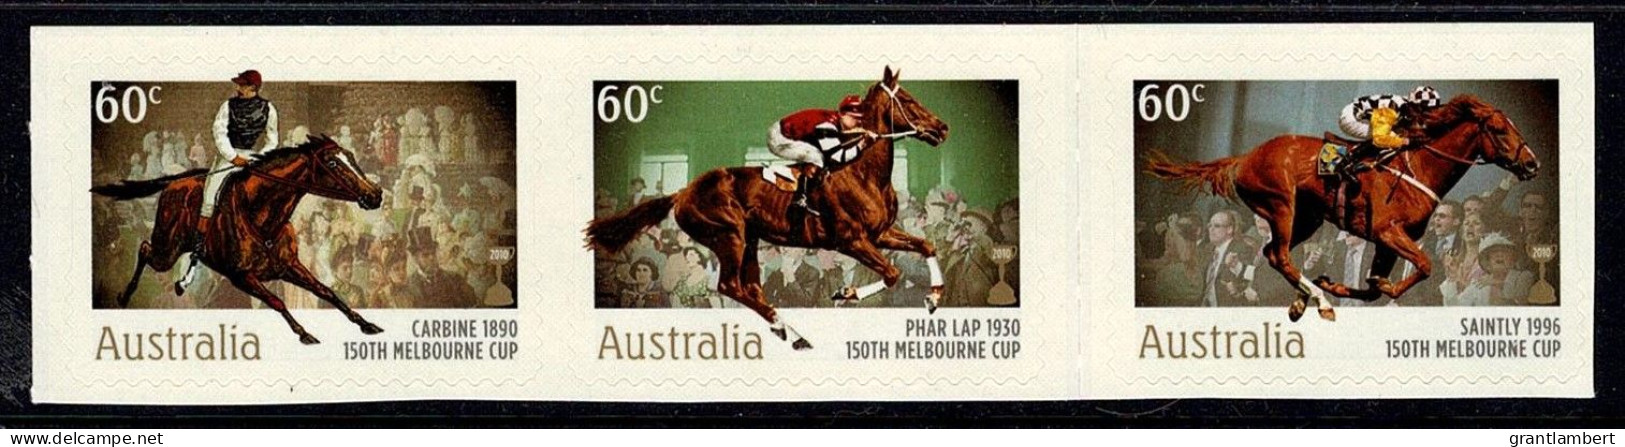 Australia 2010 Melbourne Cup Horses - Strip Of 3 Self-adhesives MNH - Neufs